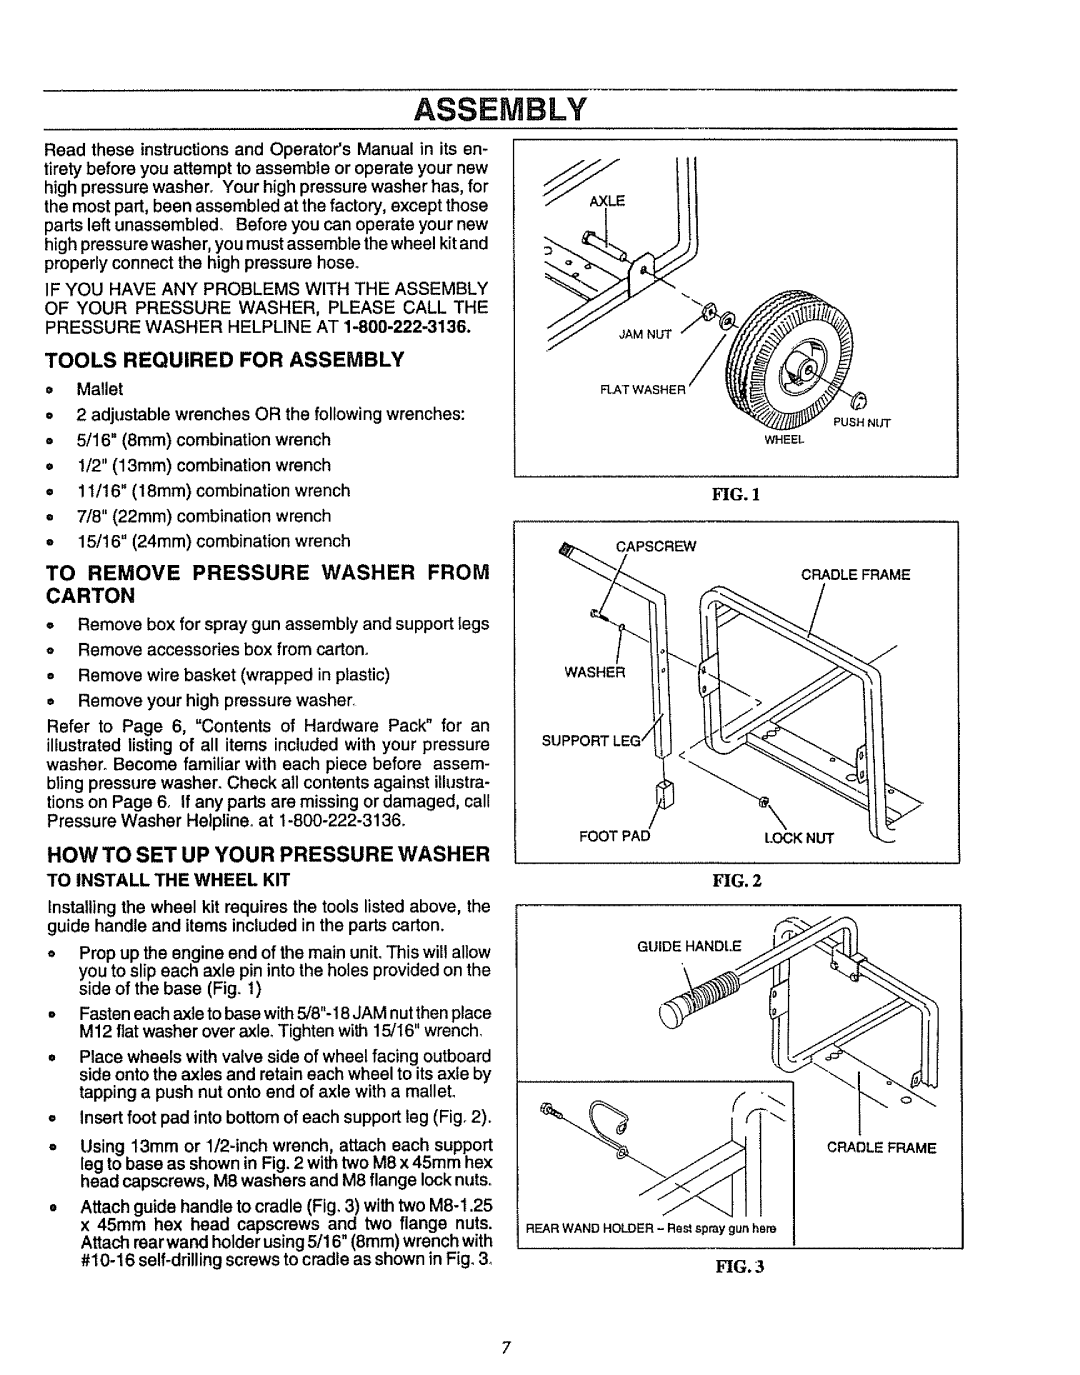 Craftsman 580.751781 Tools Required For Assembly, To Remove Pressure Washer From Carton, To Install The Wheel Kit 